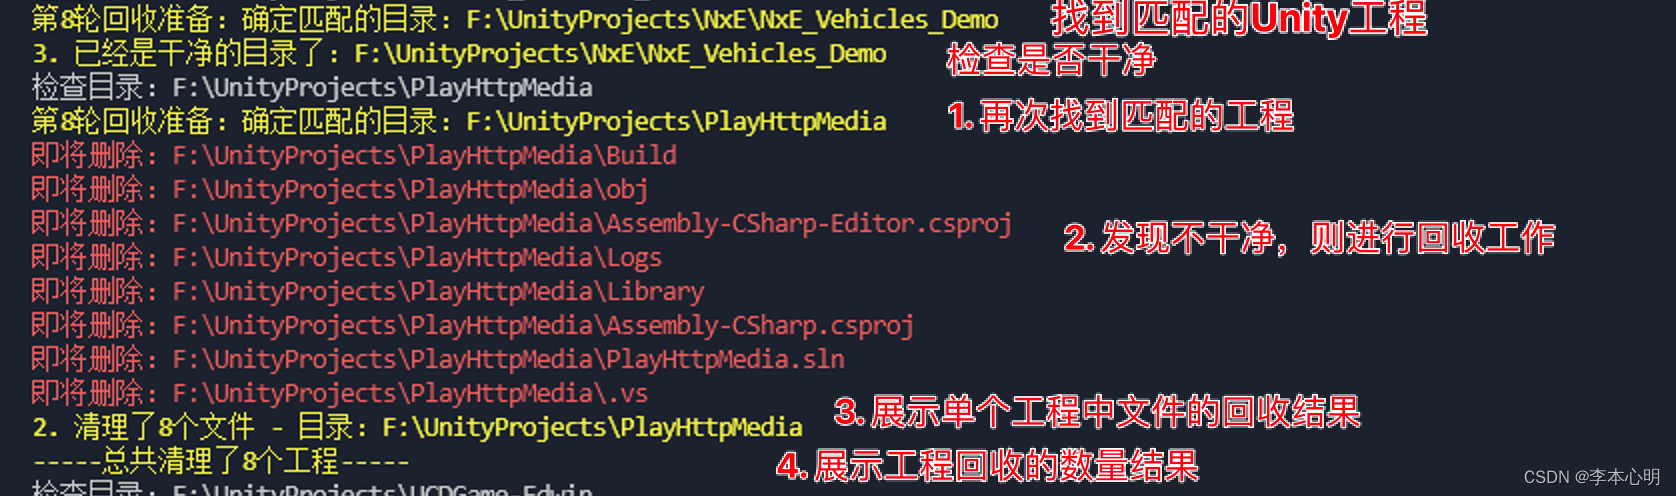 Python<span style='color:red;'>工具</span>-<span style='color:red;'>清理</span>Unity(批量深度)<span style='color:red;'>清理</span>U3D项目<span style='color:red;'>工程</span>保留关键<span style='color:red;'>工程</span>文件